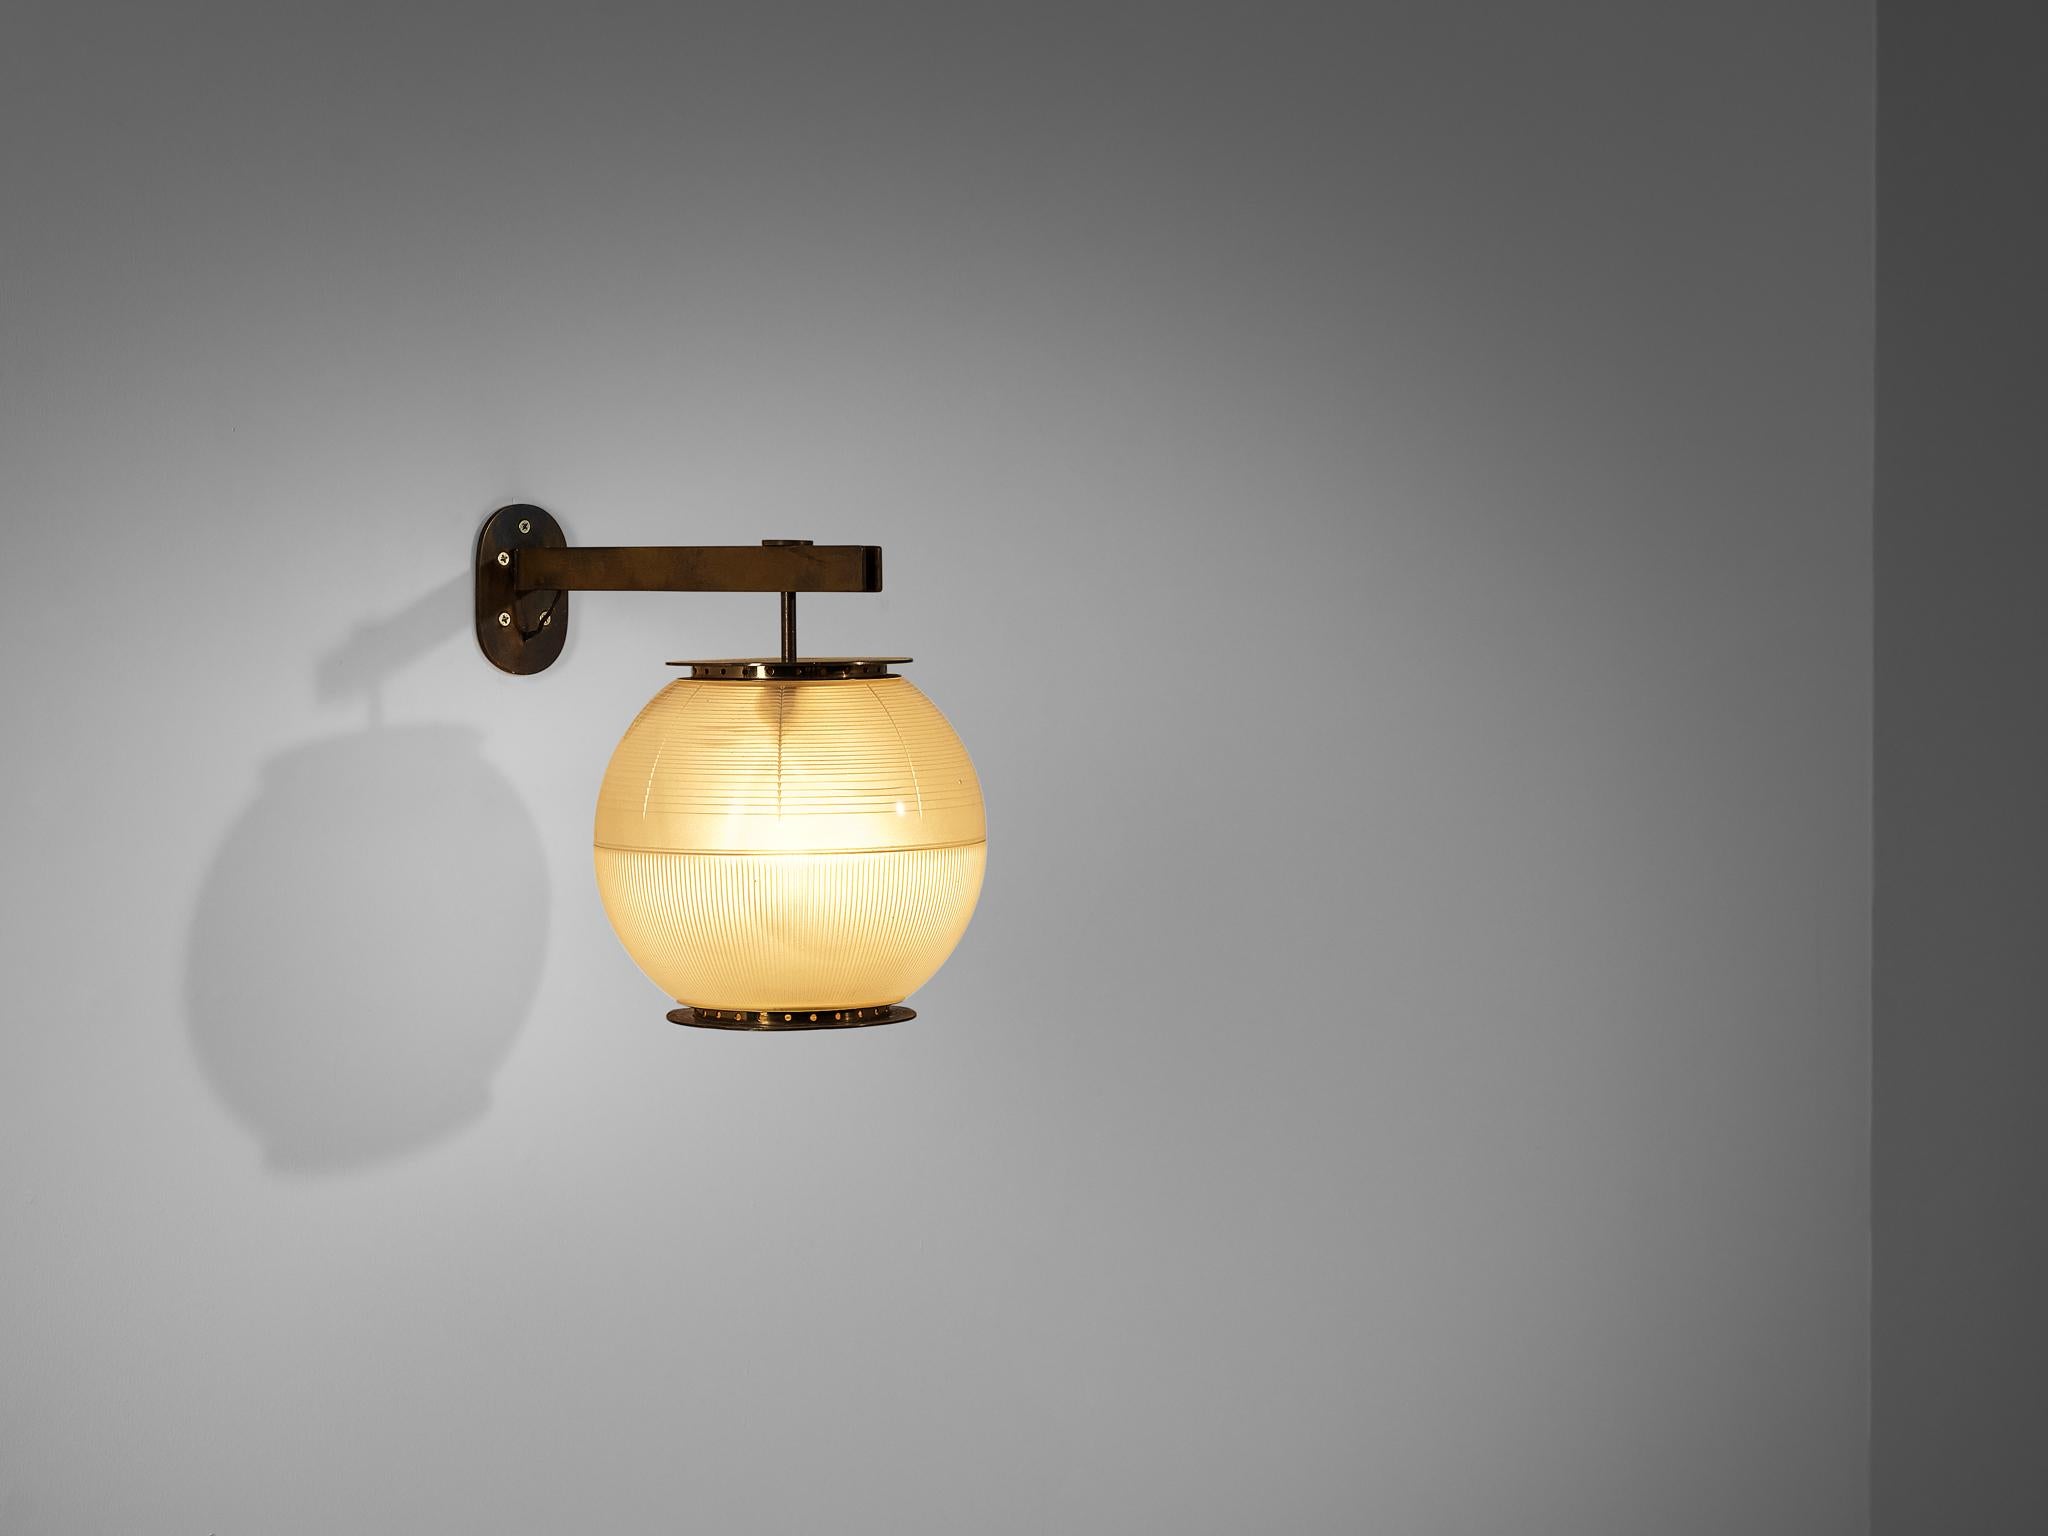 Ignazio Gardella for Azucena, wall light model 'LP7'/Doppio Vetro, brass and glass, Italy, 1955

An intriguing wall light by the designer and architect Ignazio Gardella. The glass spheres are adjustable by moving them closer or further from the